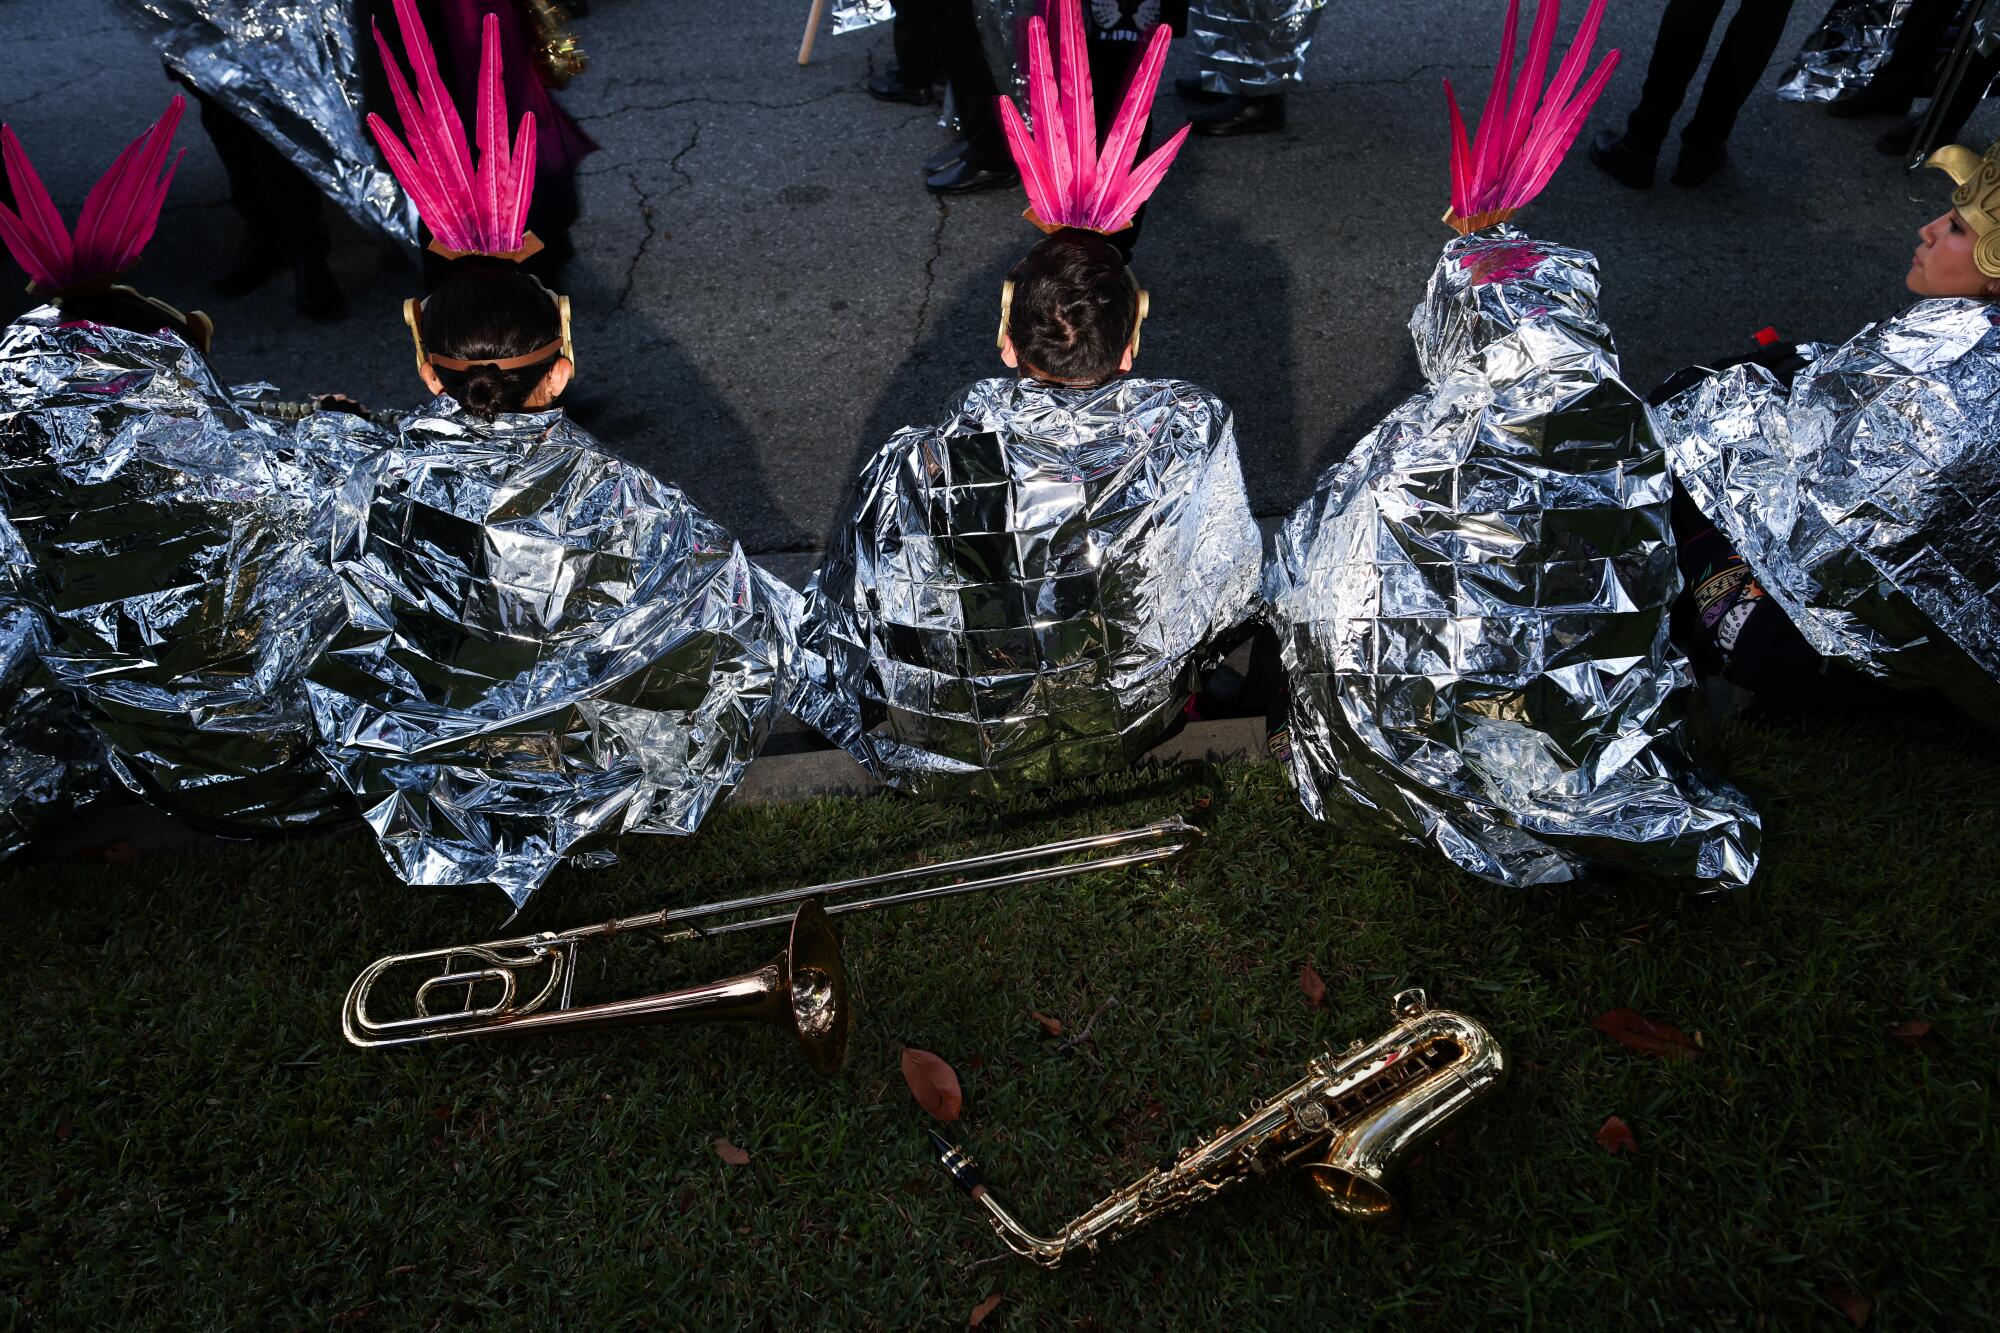 Band members with feathered headdresses are wrapped in Mylar blankets.